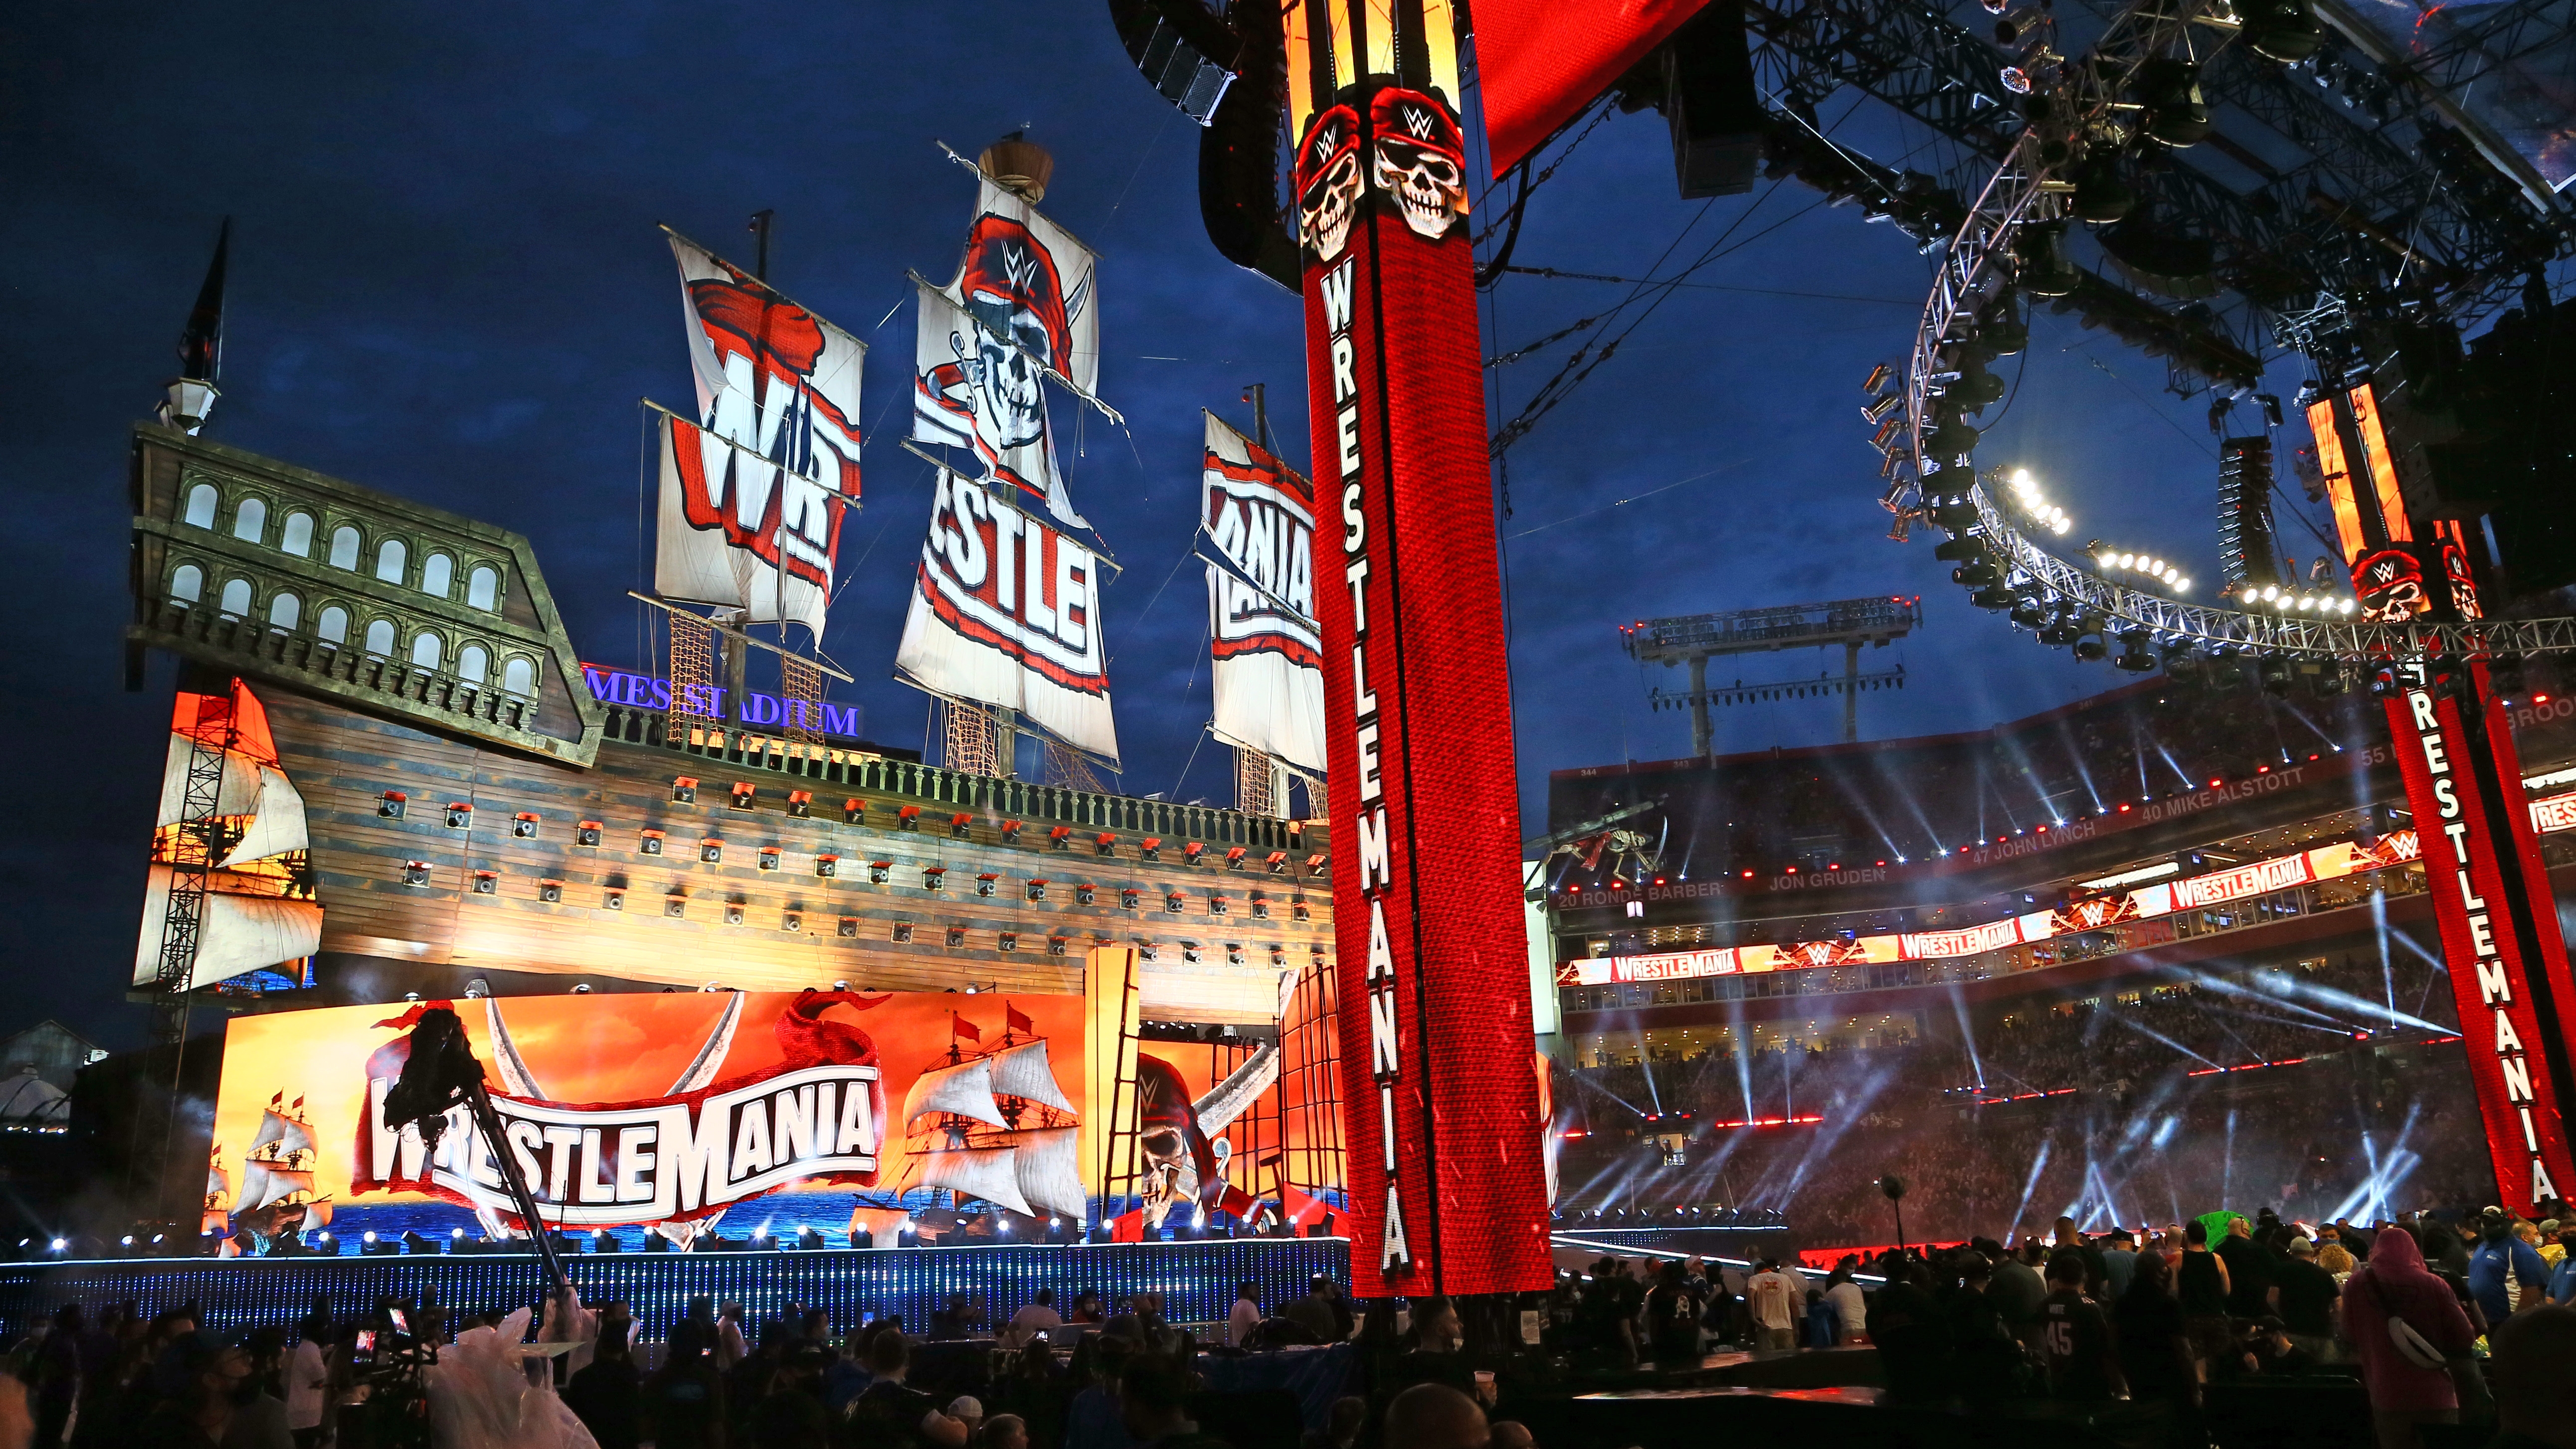 Wrestlemania 31: a beginner's guide to the biggest wrestling event